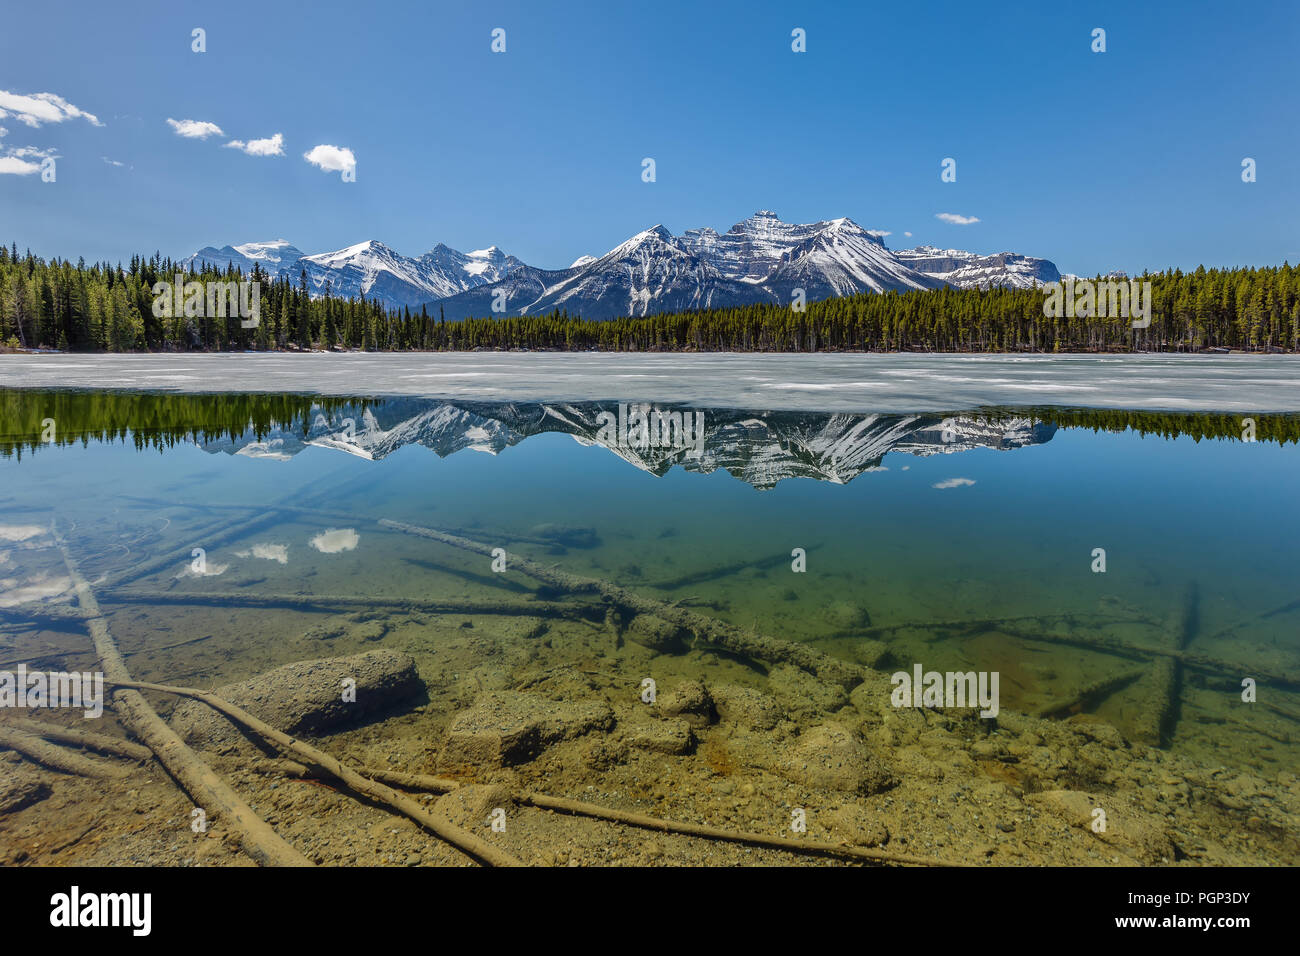 Reflection of the Canadian Rockies in Herbert Lake, the lake was still half frozen over. Stock Photo